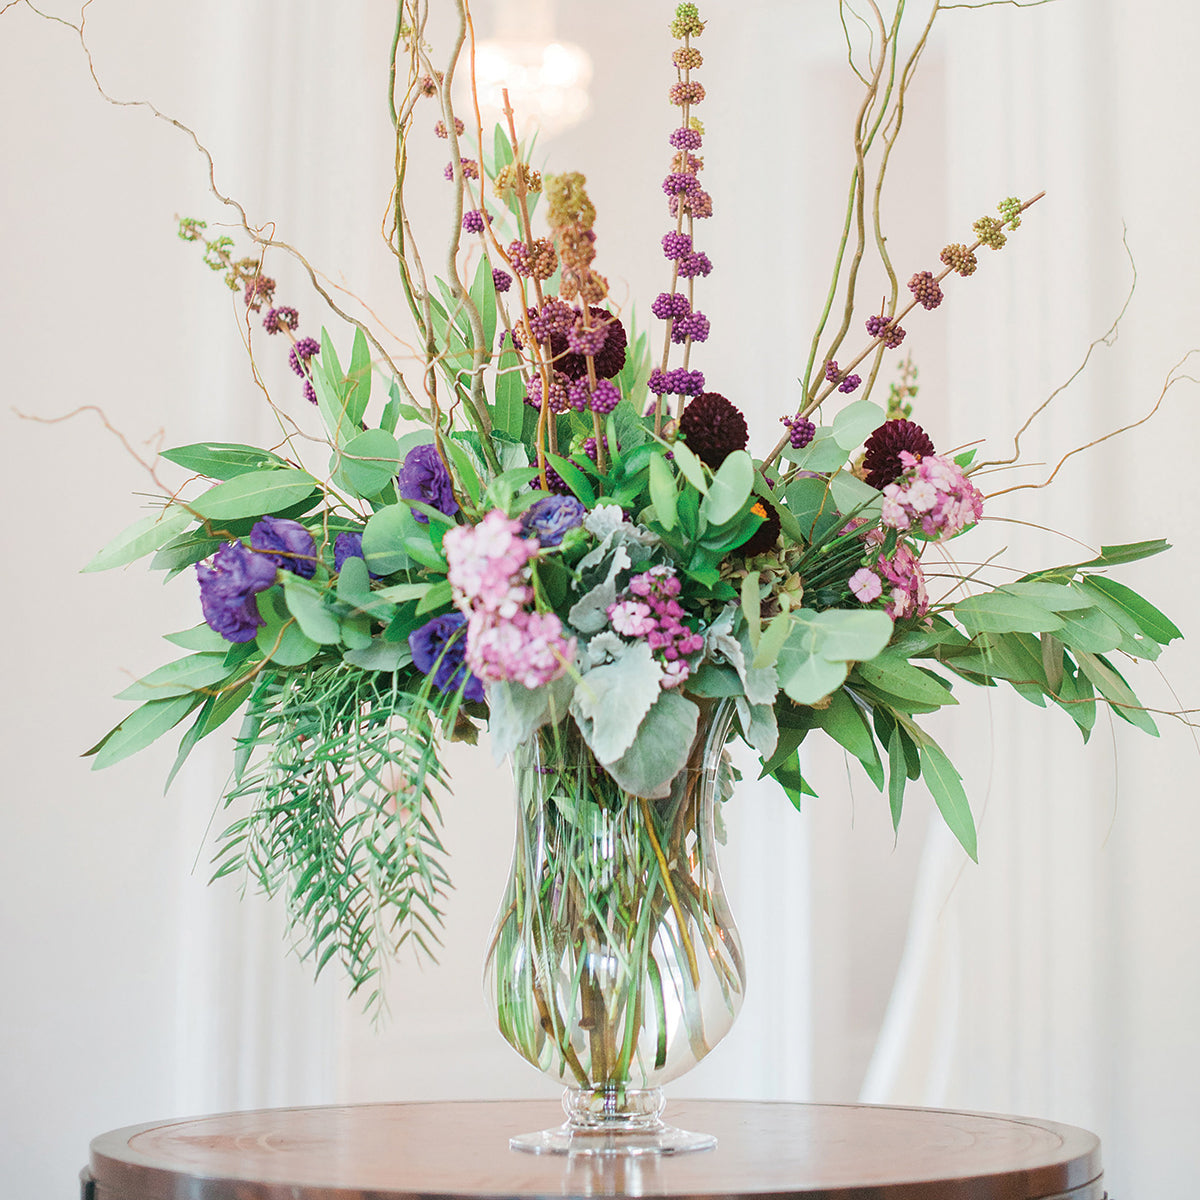 An elaborate bouquet in the 14 inch Charlotte vase, with tall, twisting branches, deep purple flowers, and vibrant greenery, creating a dramatic and elegant centerpiece on a round wooden table, with a soft, neutral backdrop.